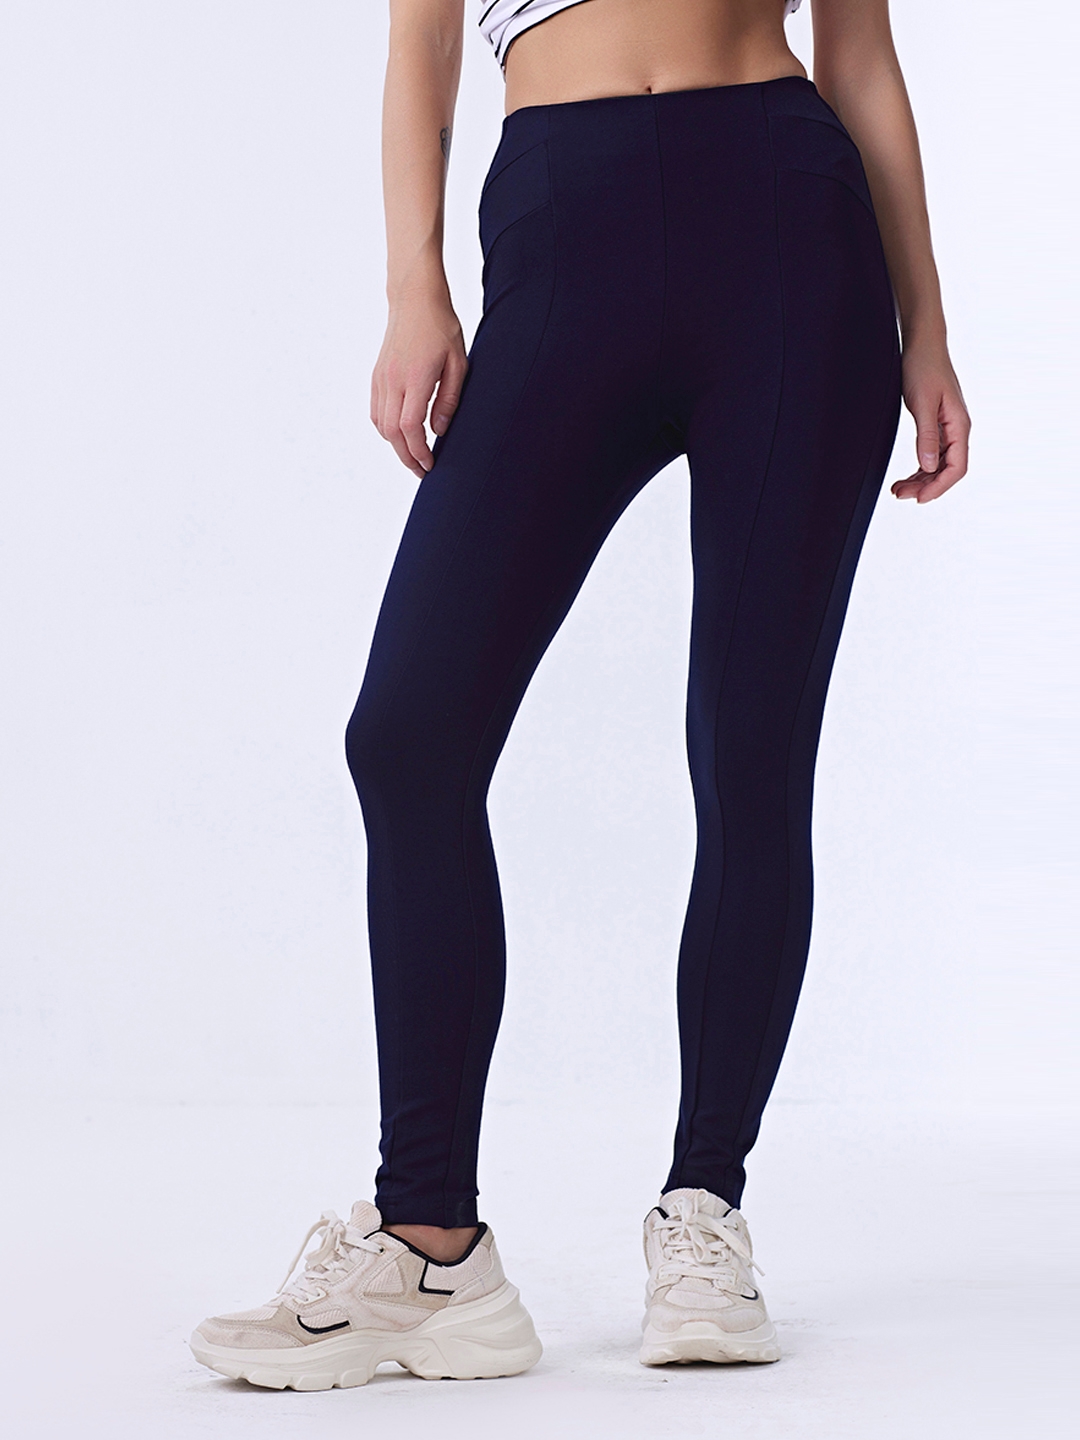 Shark Skin High Waist Maternity Sports Leggings For Women Booty Lifting, Slim  Fit Yoga Pants For Spring And Autumn S075 230505 From Kong00, $18.65 |  DHgate.Com